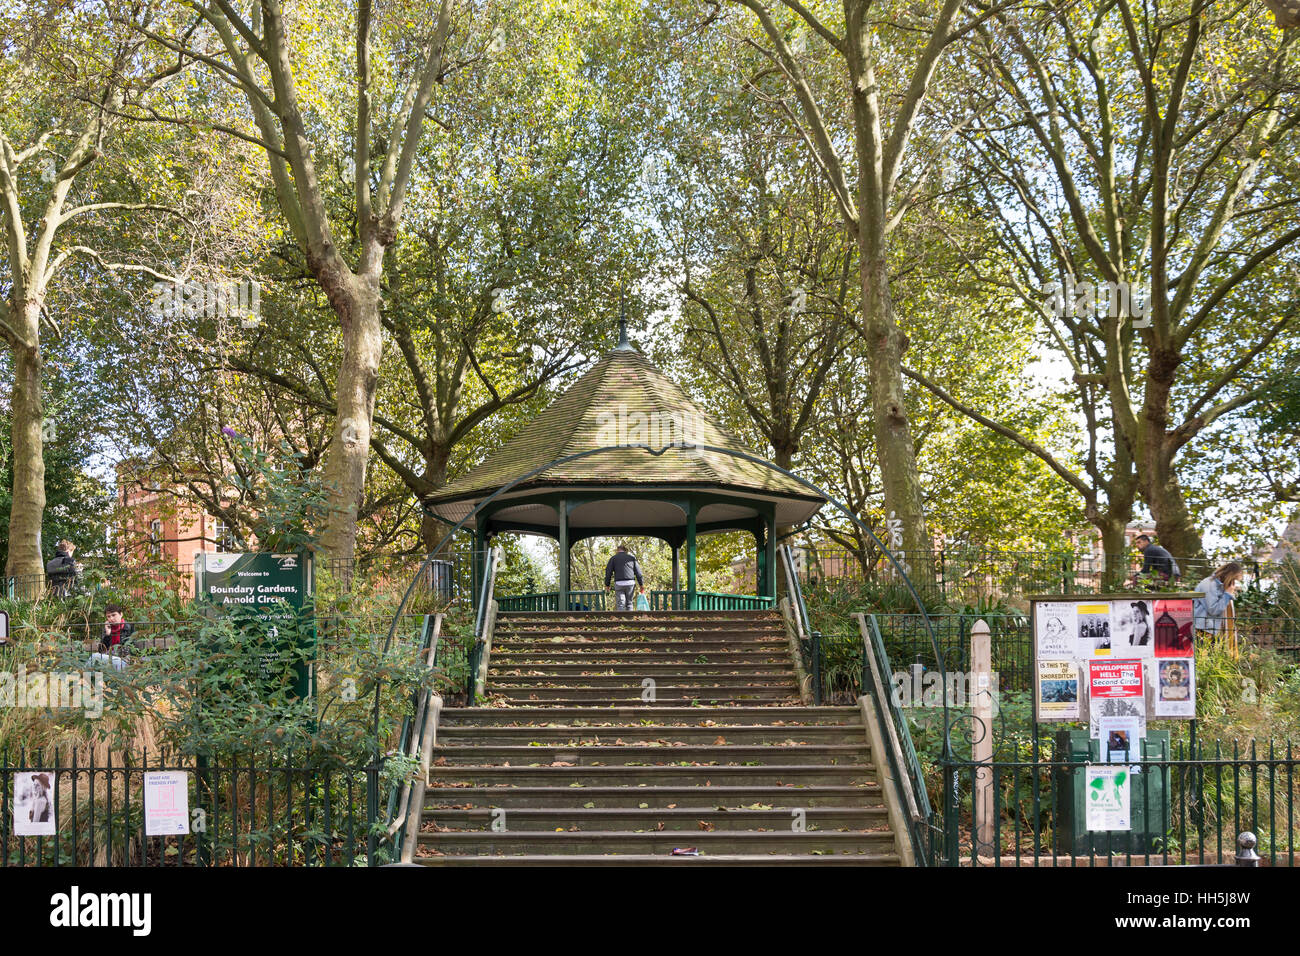 Jardins limitrophes, Arnold Circus, Shoreditch, London Borough of Hackney, Greater London, Angleterre, Royaume-Uni Banque D'Images